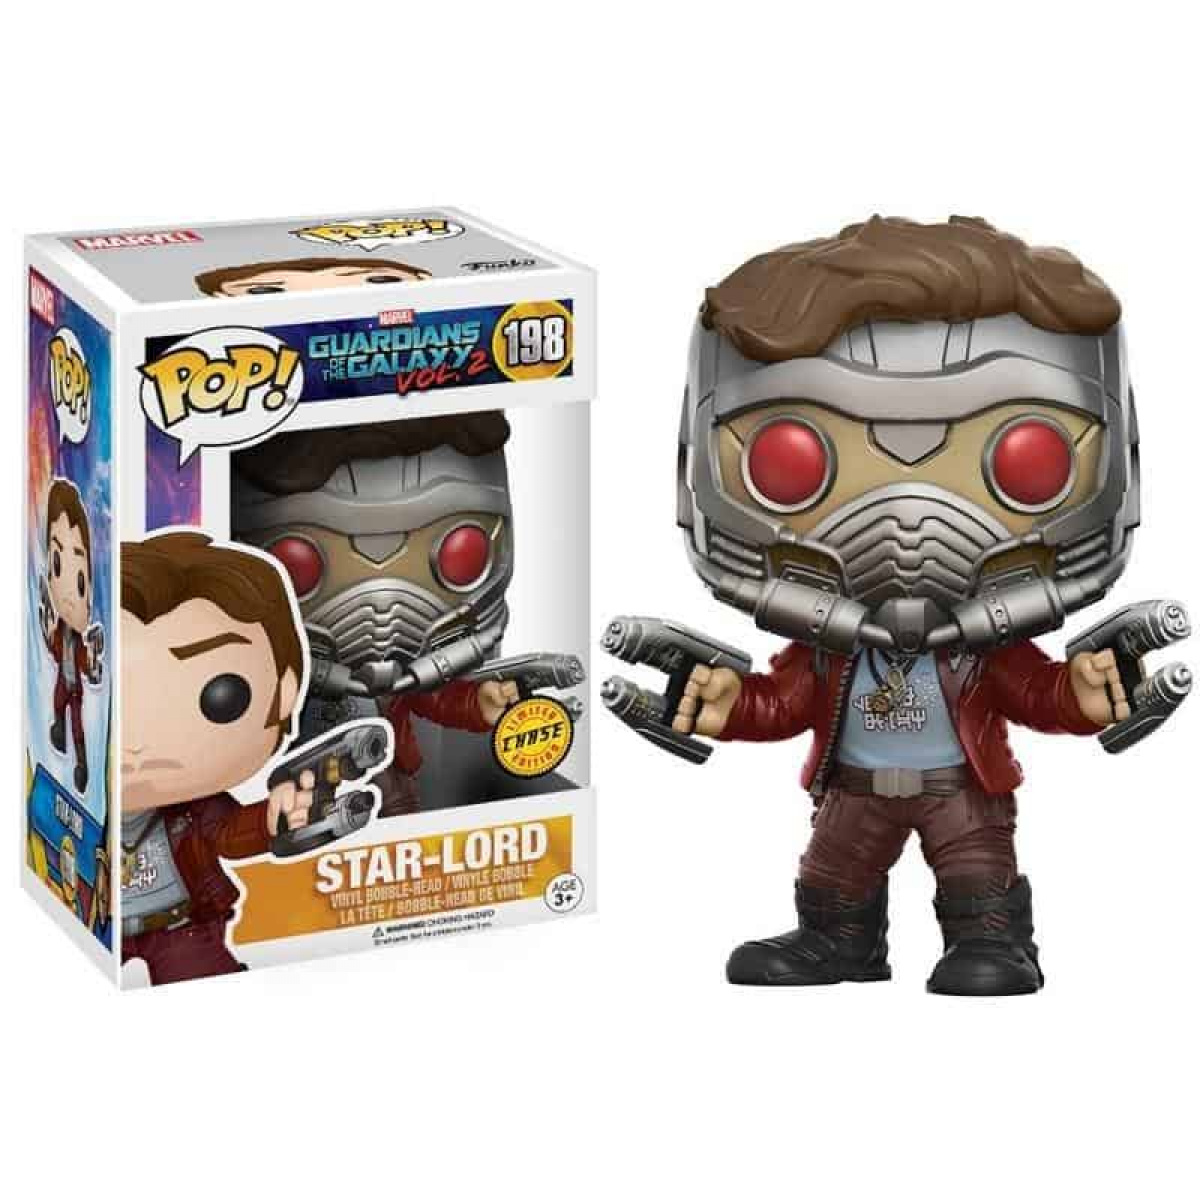 Shop Funko Pop! Guardians of the Galaxy Vol. 2 Star-Lord (Chase) Pop! Vinyl Figure anime